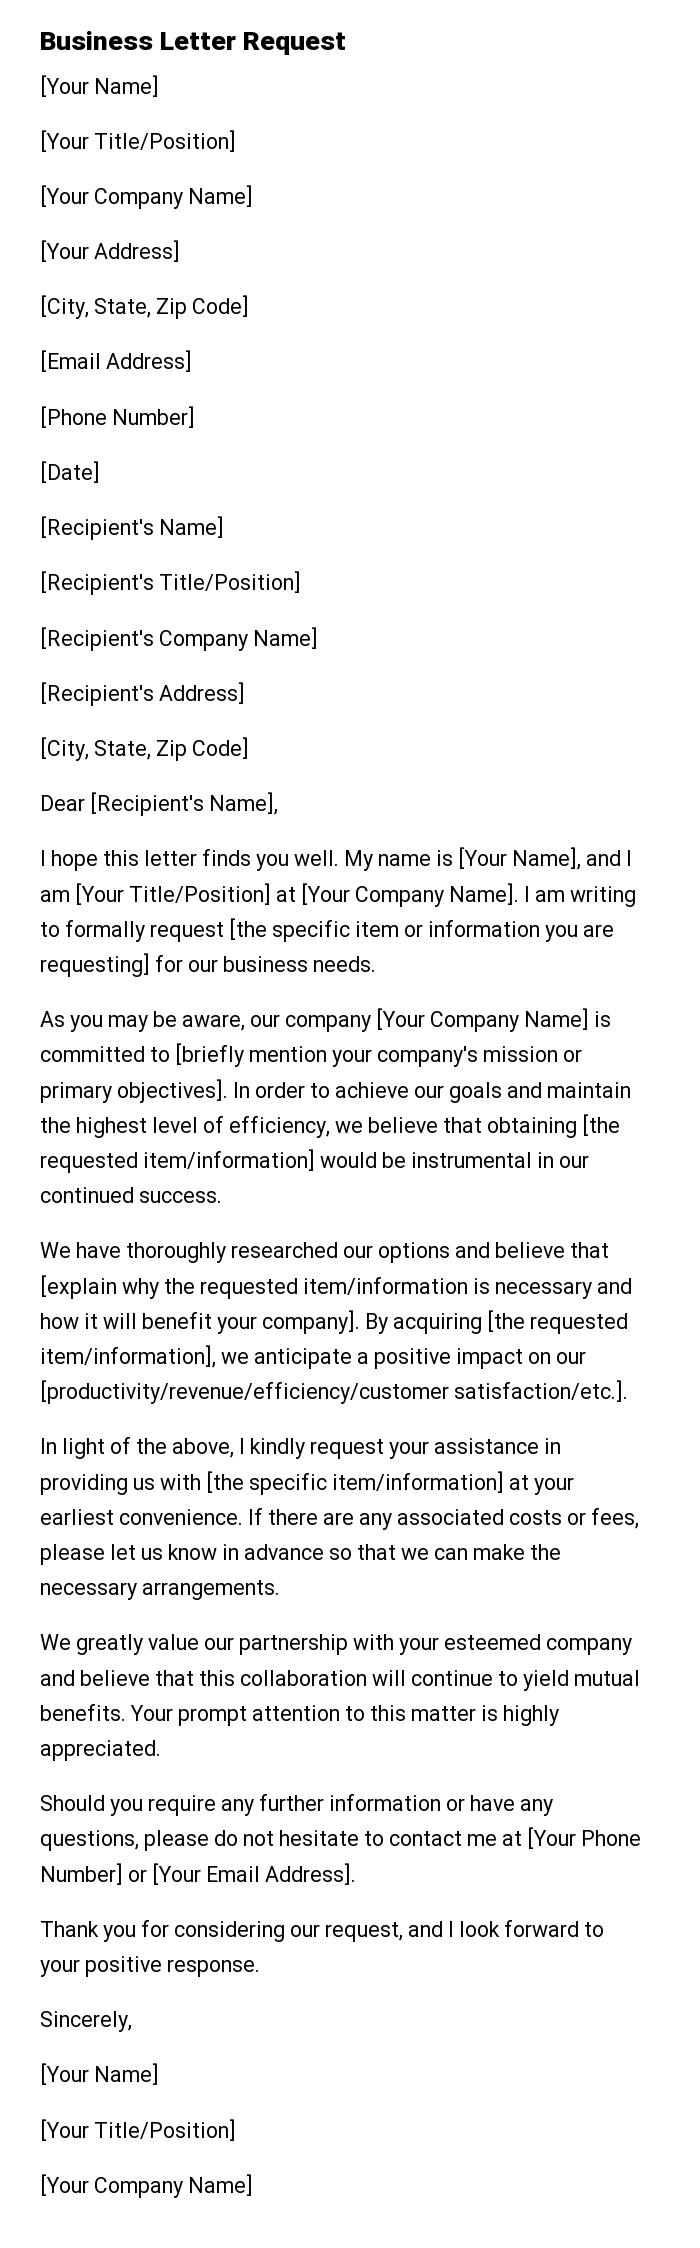 Business Letter Request